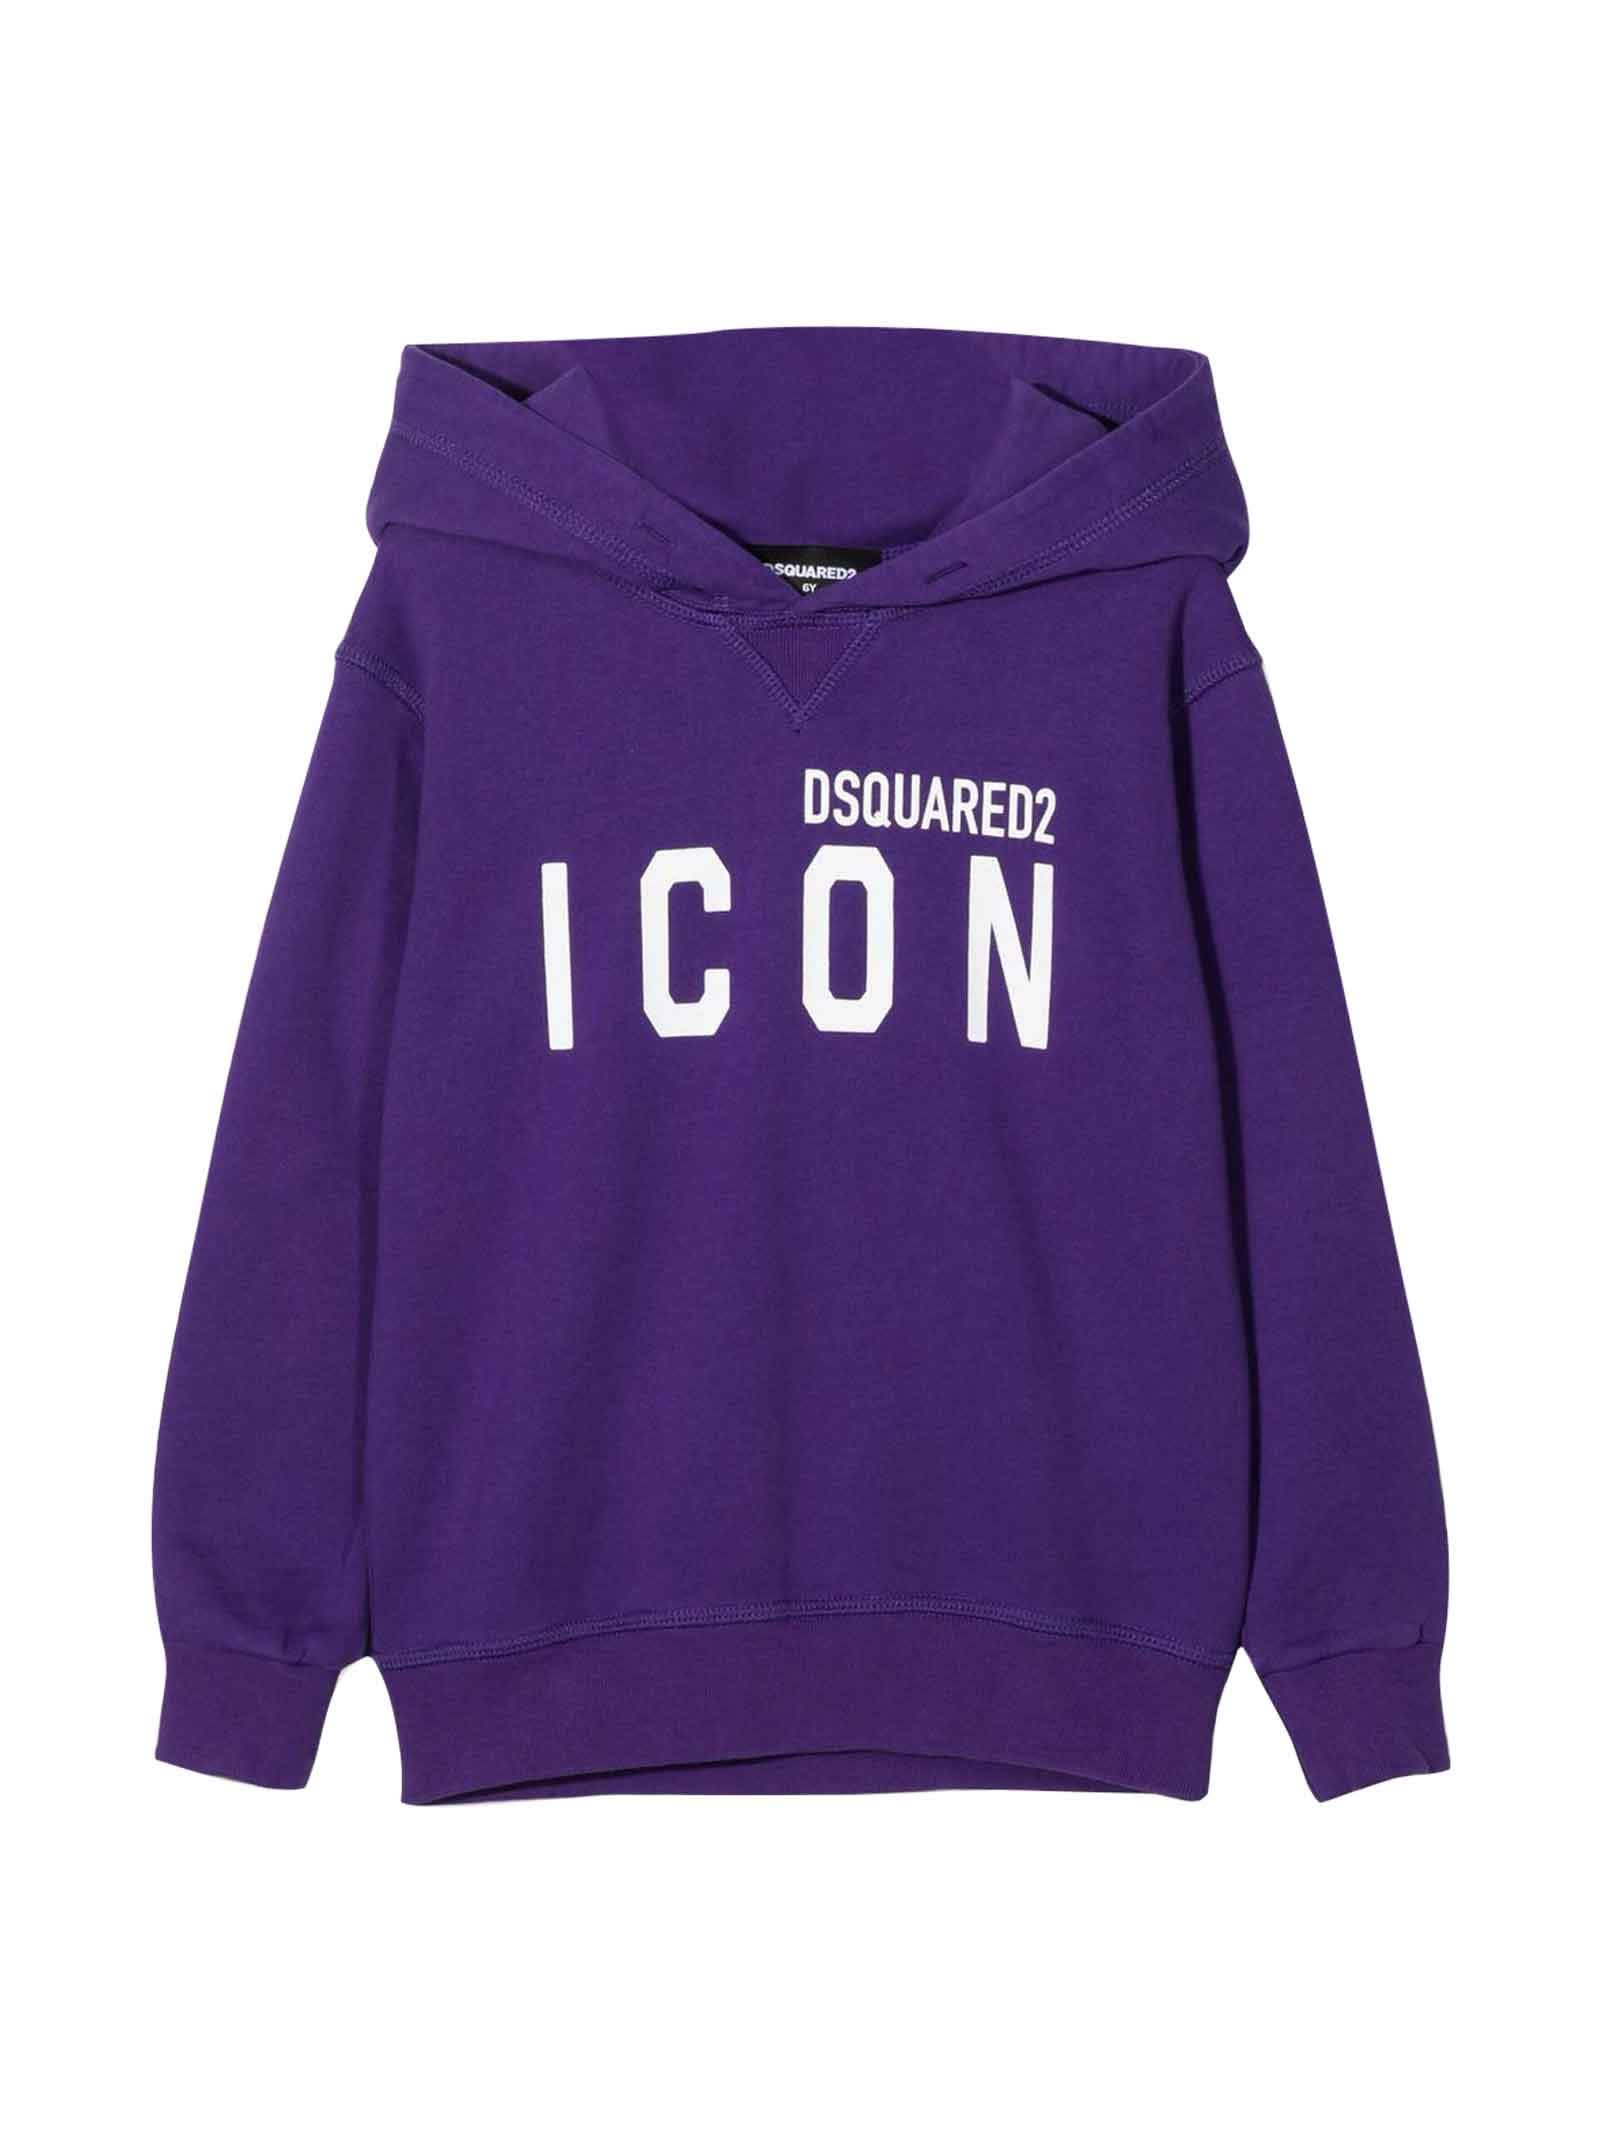 Dsquared2 Kids' Sweatshirt With Print In Violet